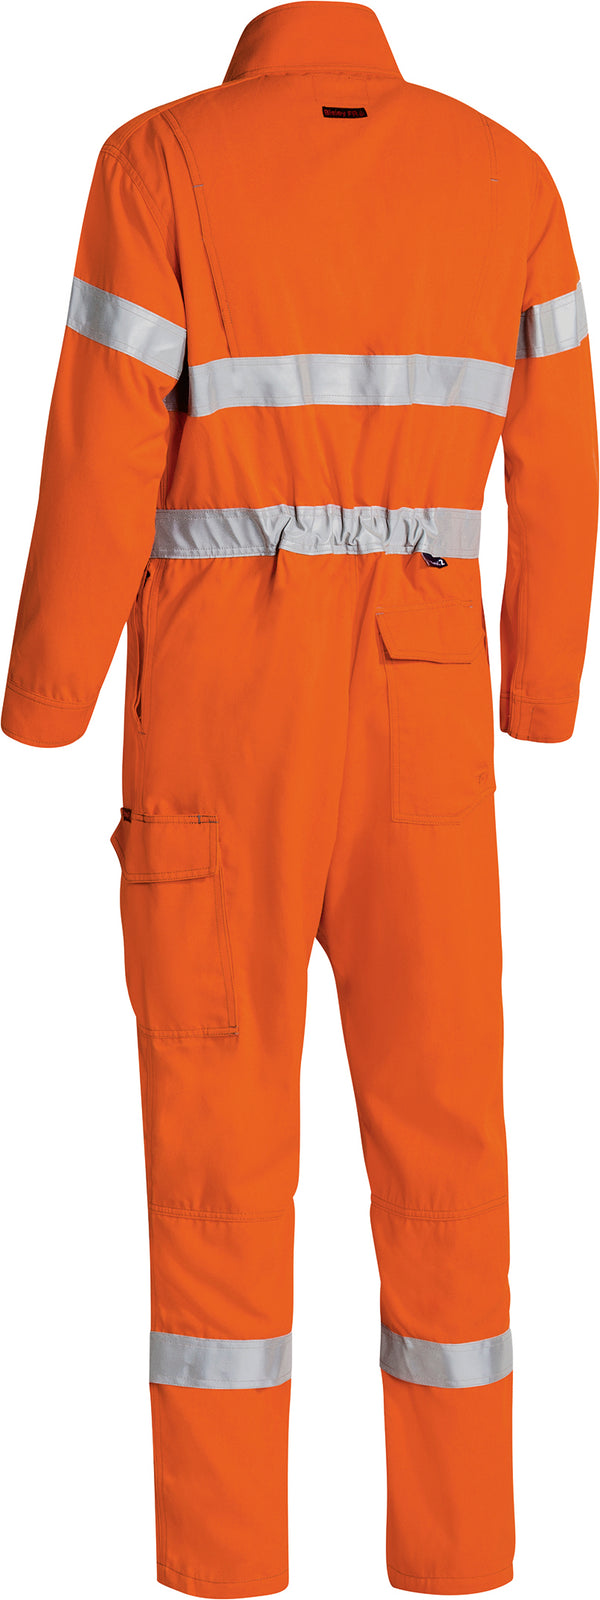 Tencate Tecasafe Plus 700 Taped Hi-Vis Engineered FR Vented Coverall (Stout)